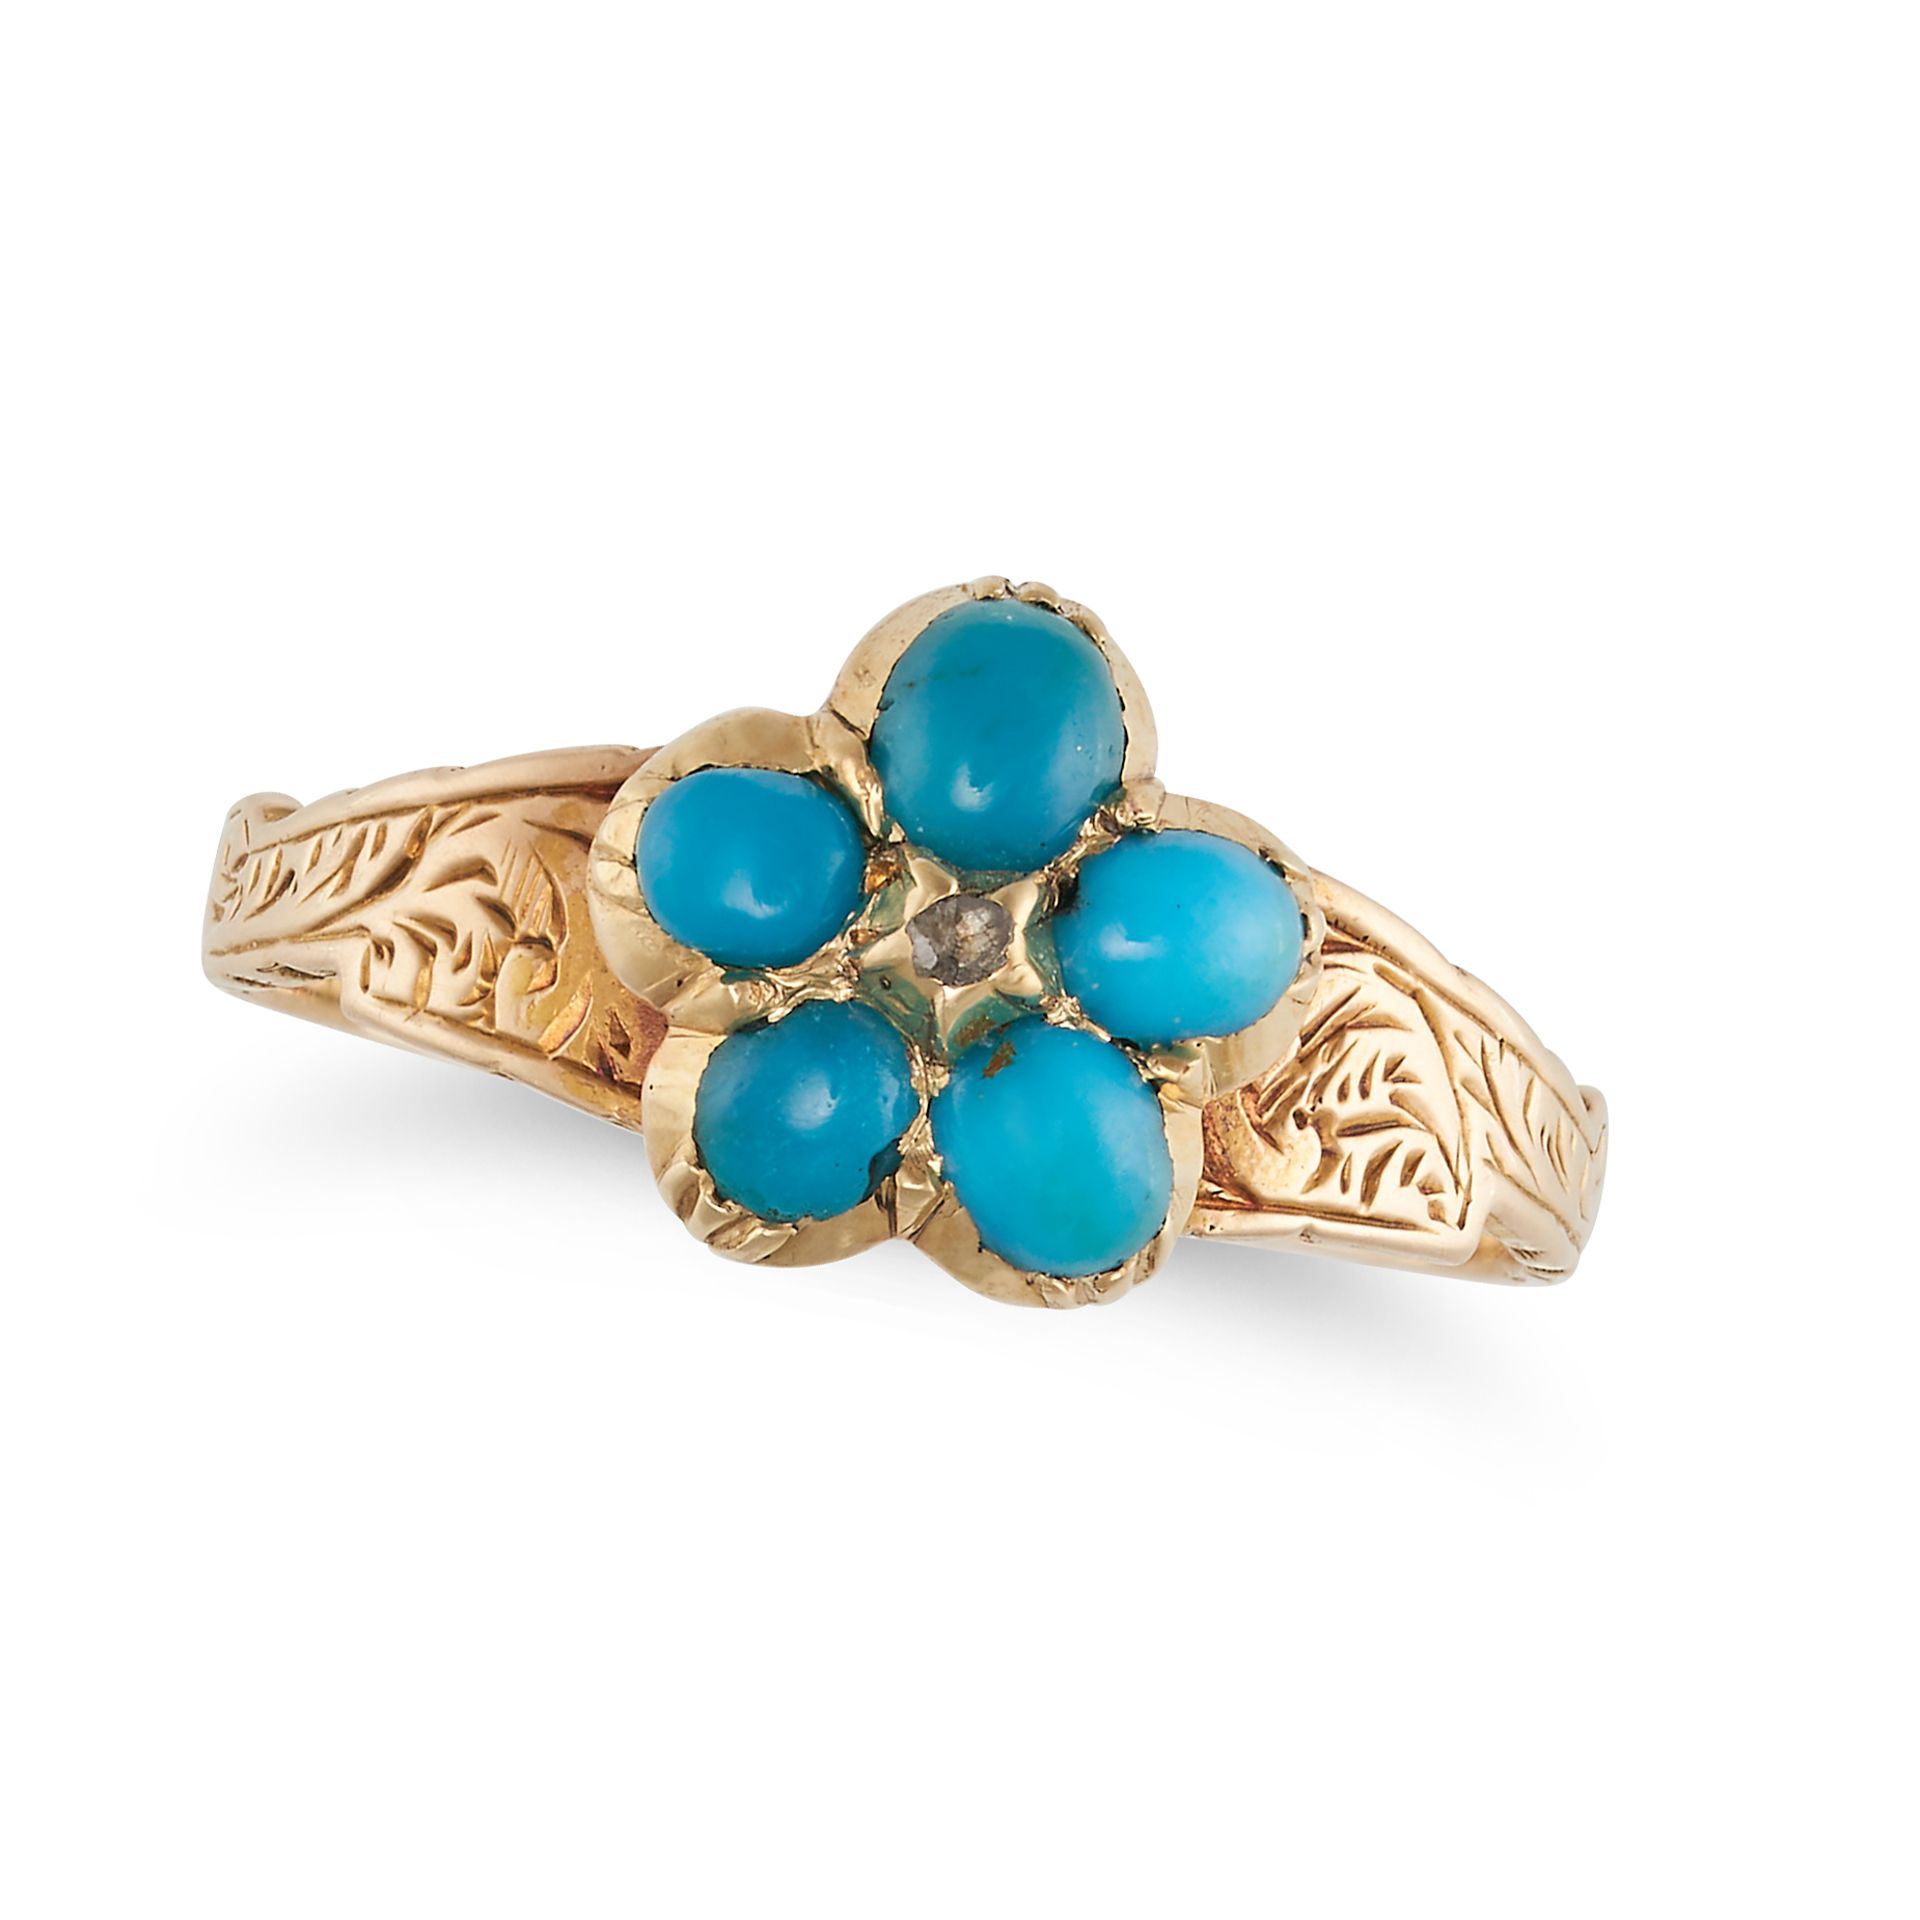 AN ANTIQUE BLUE GLASS AND DIAMOND FLOWER RING in yellow gold, set with a rose cut diamond in a cl...